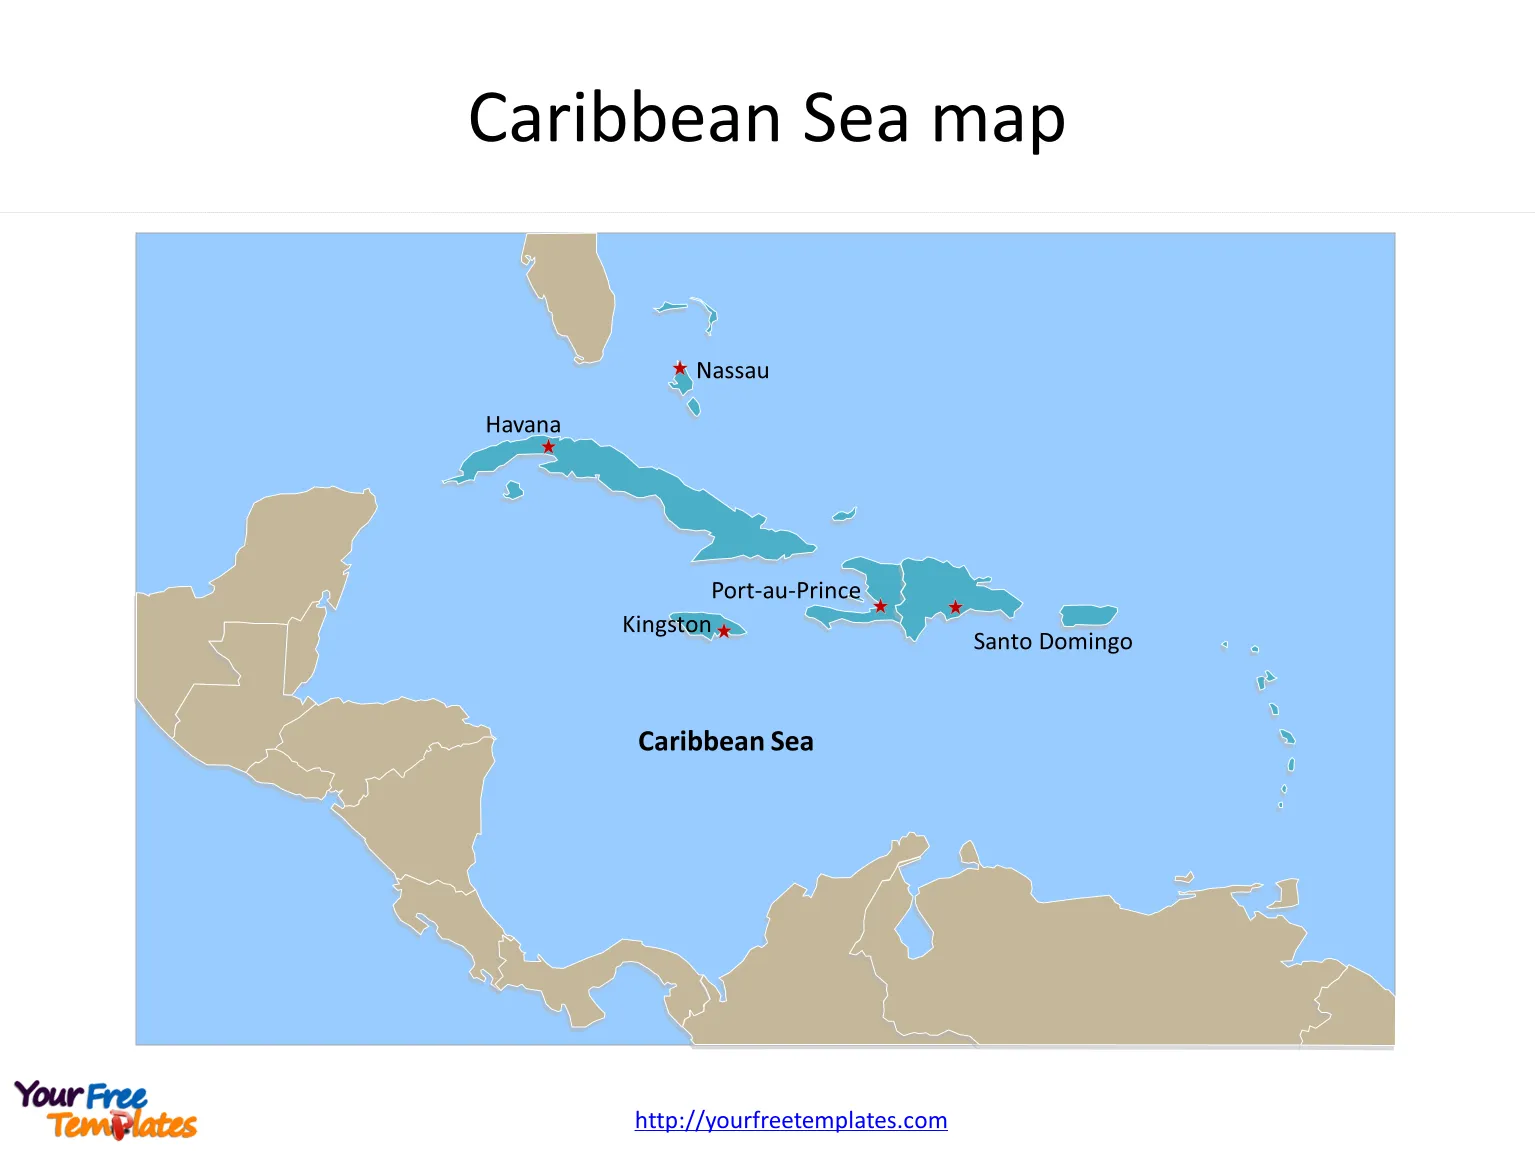 Map of Caribbean Sea with Capitals labeled on the Caribbean Sea map free templates